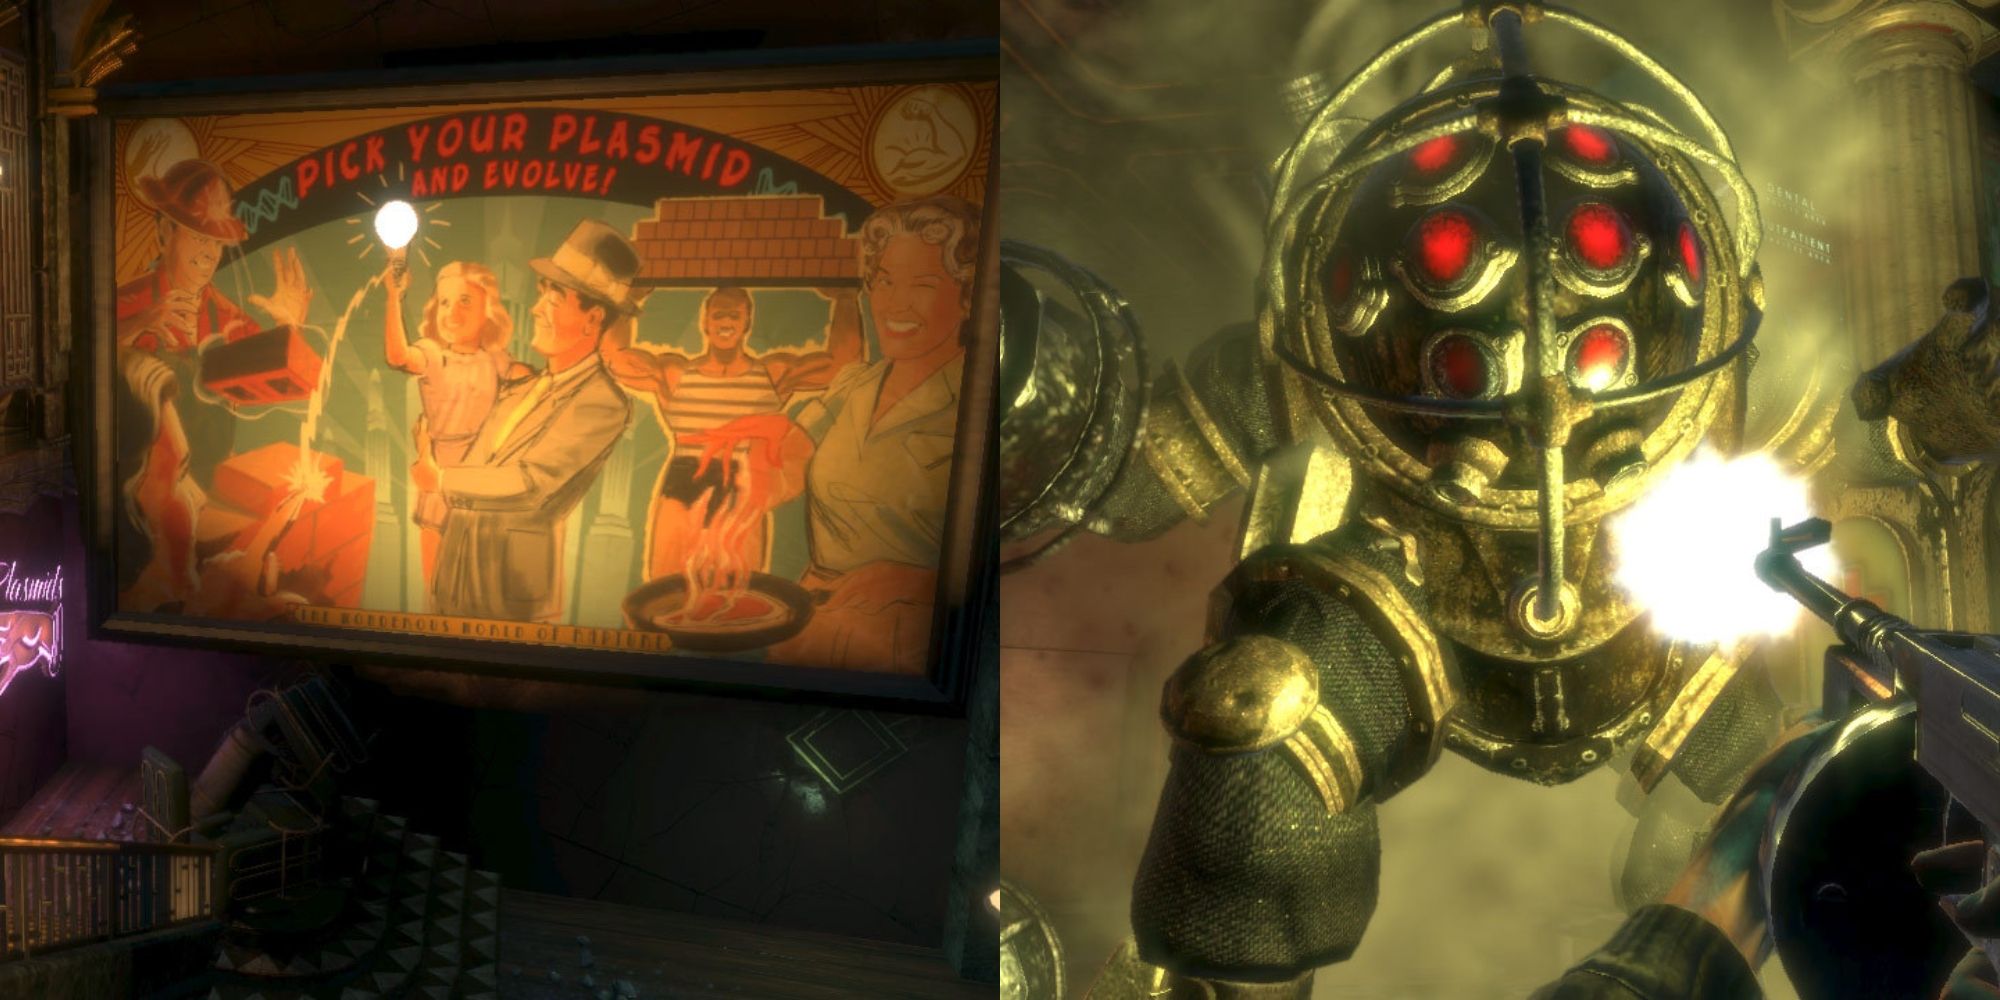 BioShock environment poster saying 'pick your plasmid and evolve' next to the player being attacked by an enemy